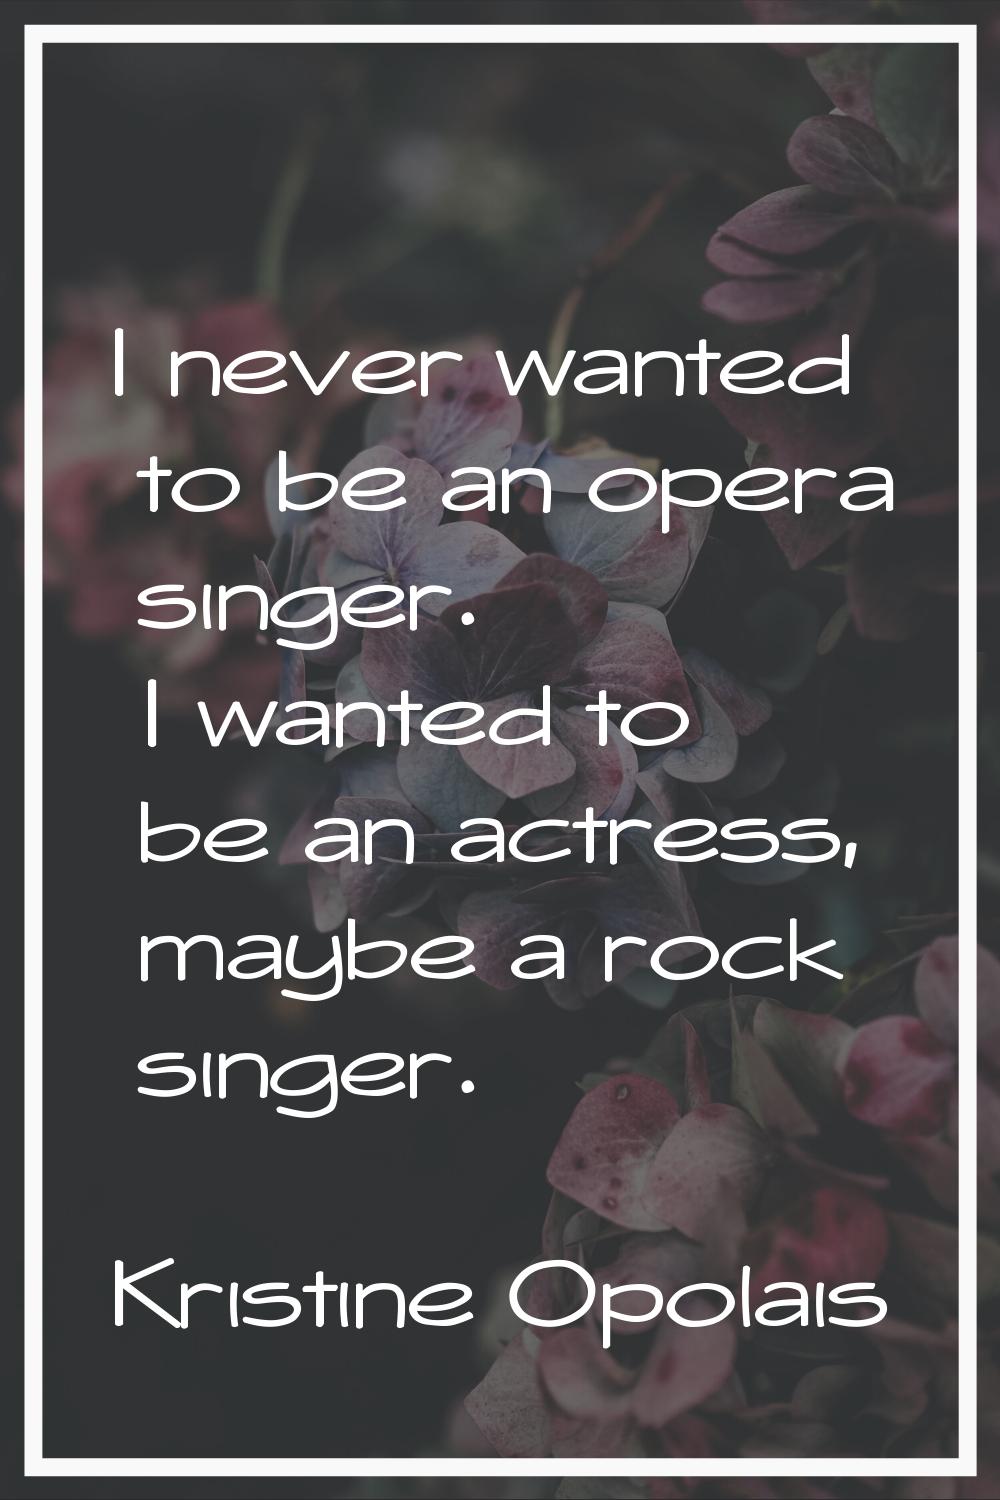 I never wanted to be an opera singer. I wanted to be an actress, maybe a rock singer.